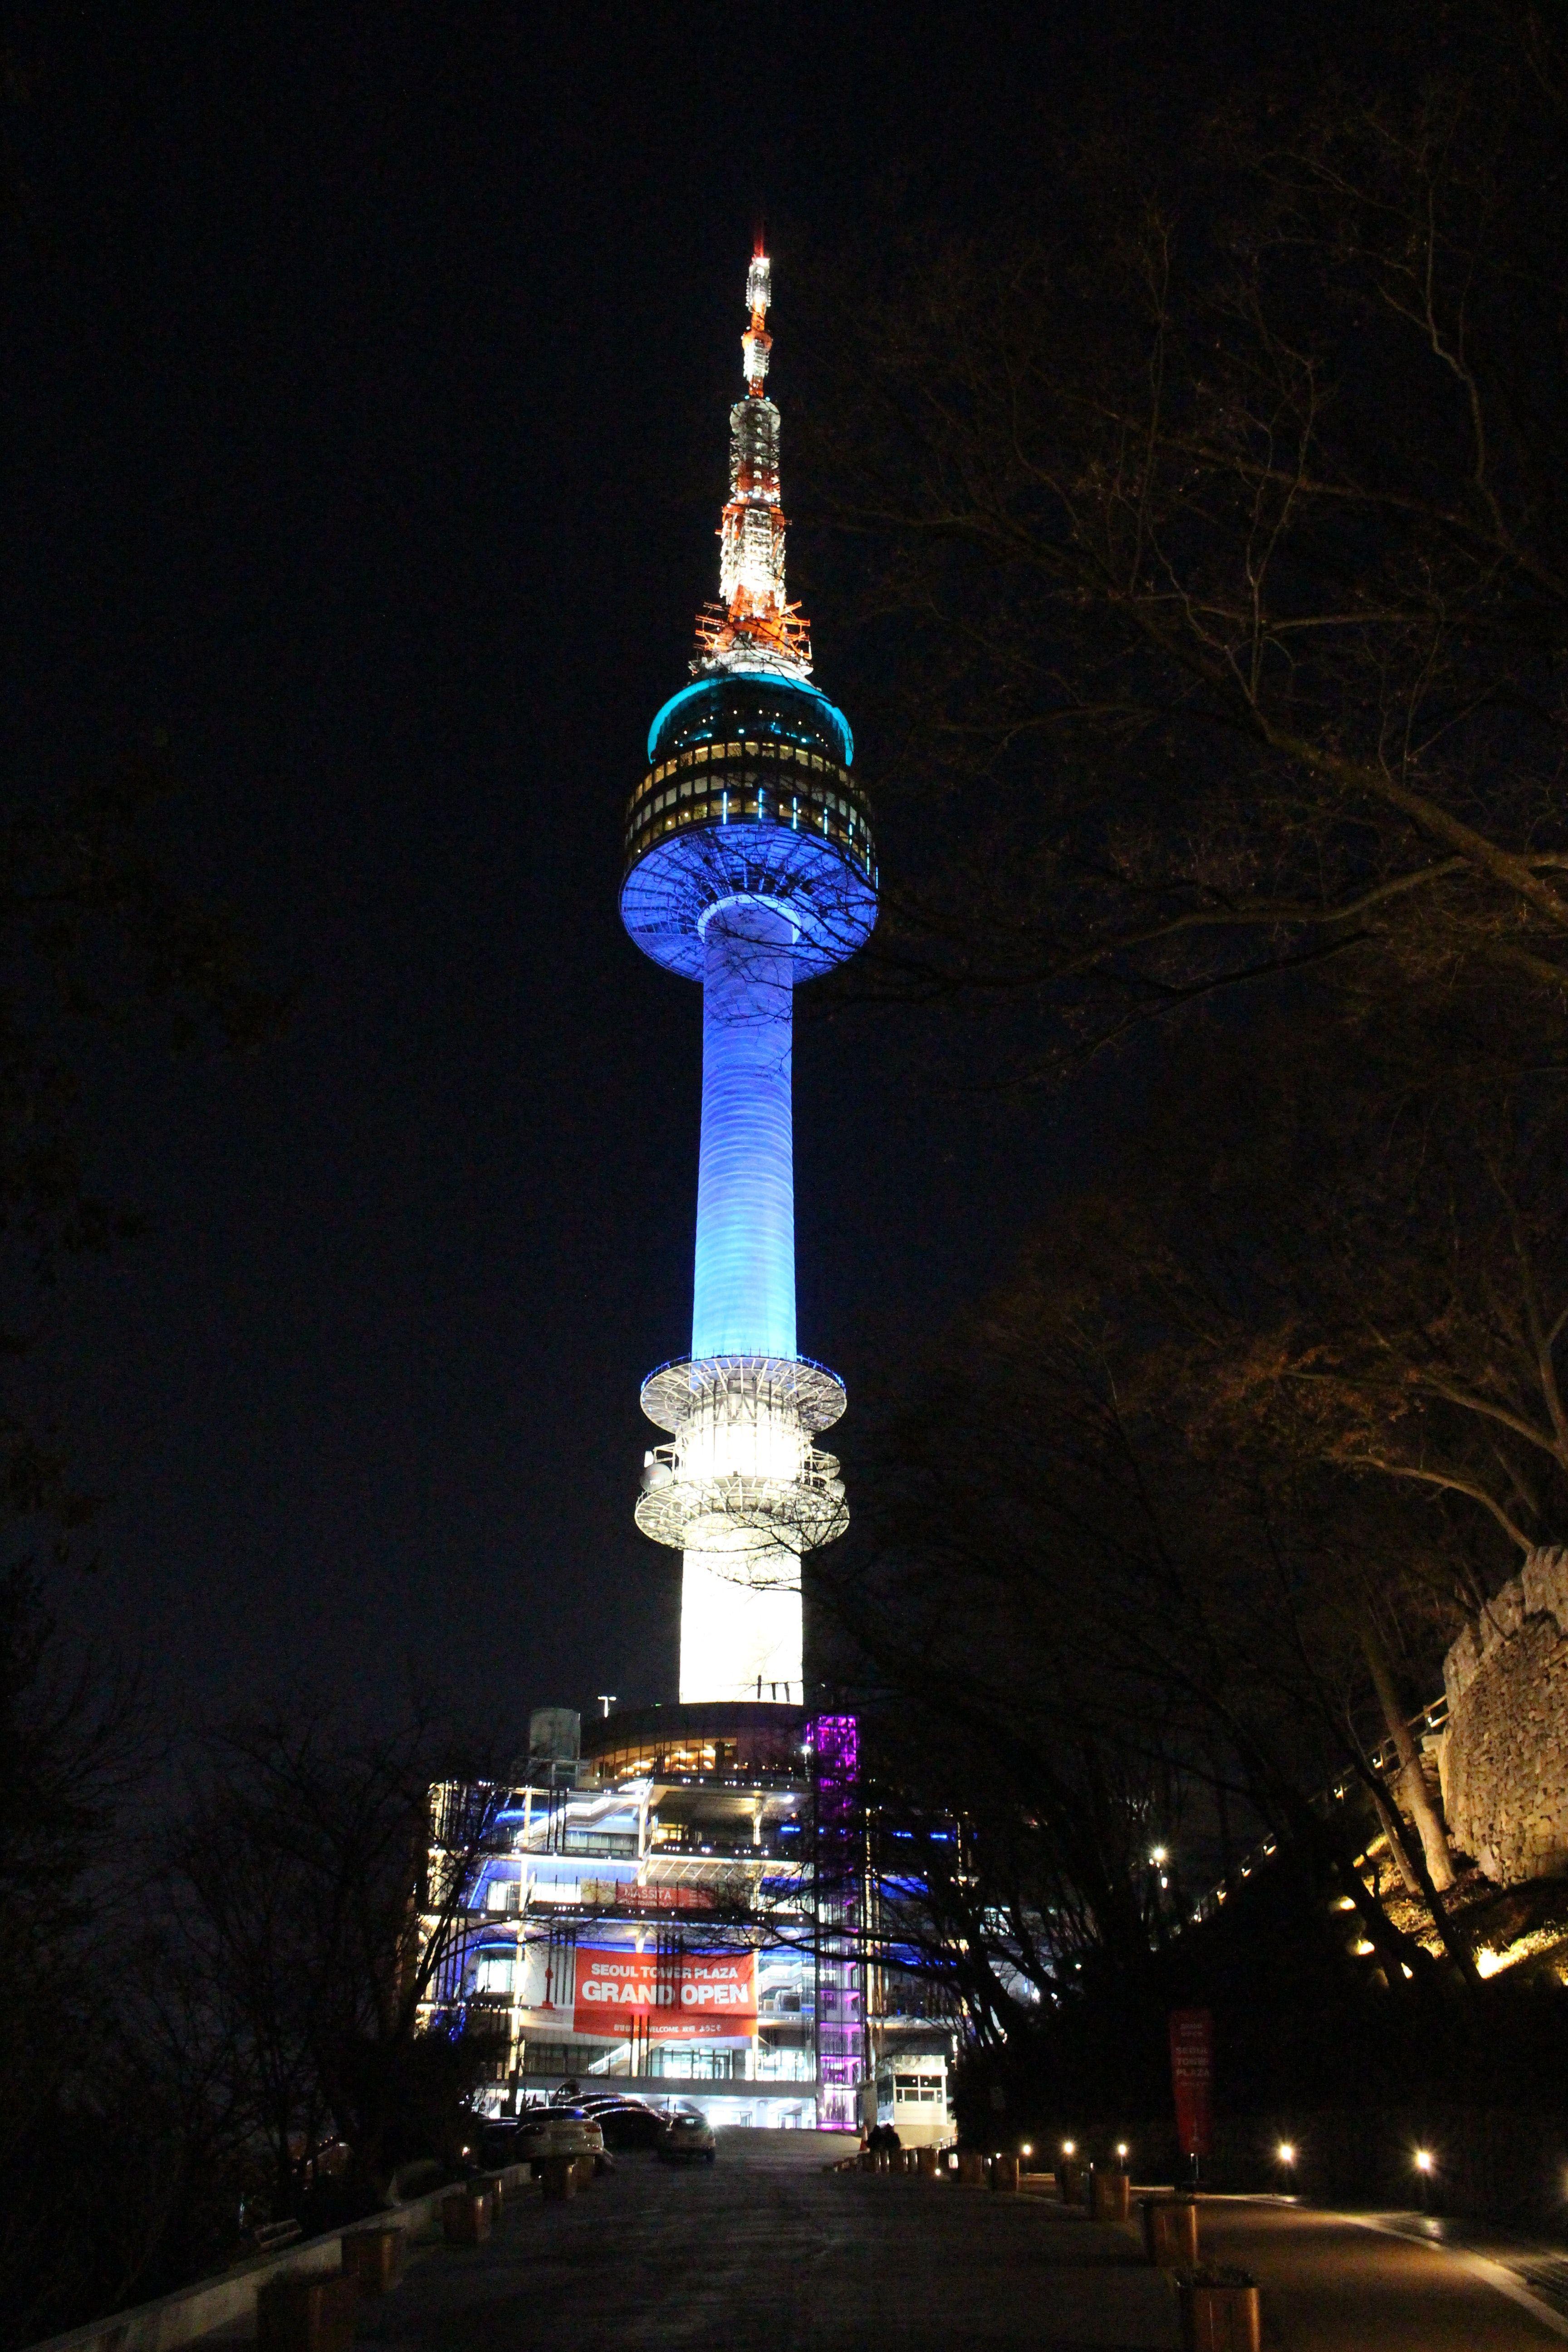 Seoul Tower Wallpapers Top Free Seoul Tower Backgrounds Images, Photos, Reviews